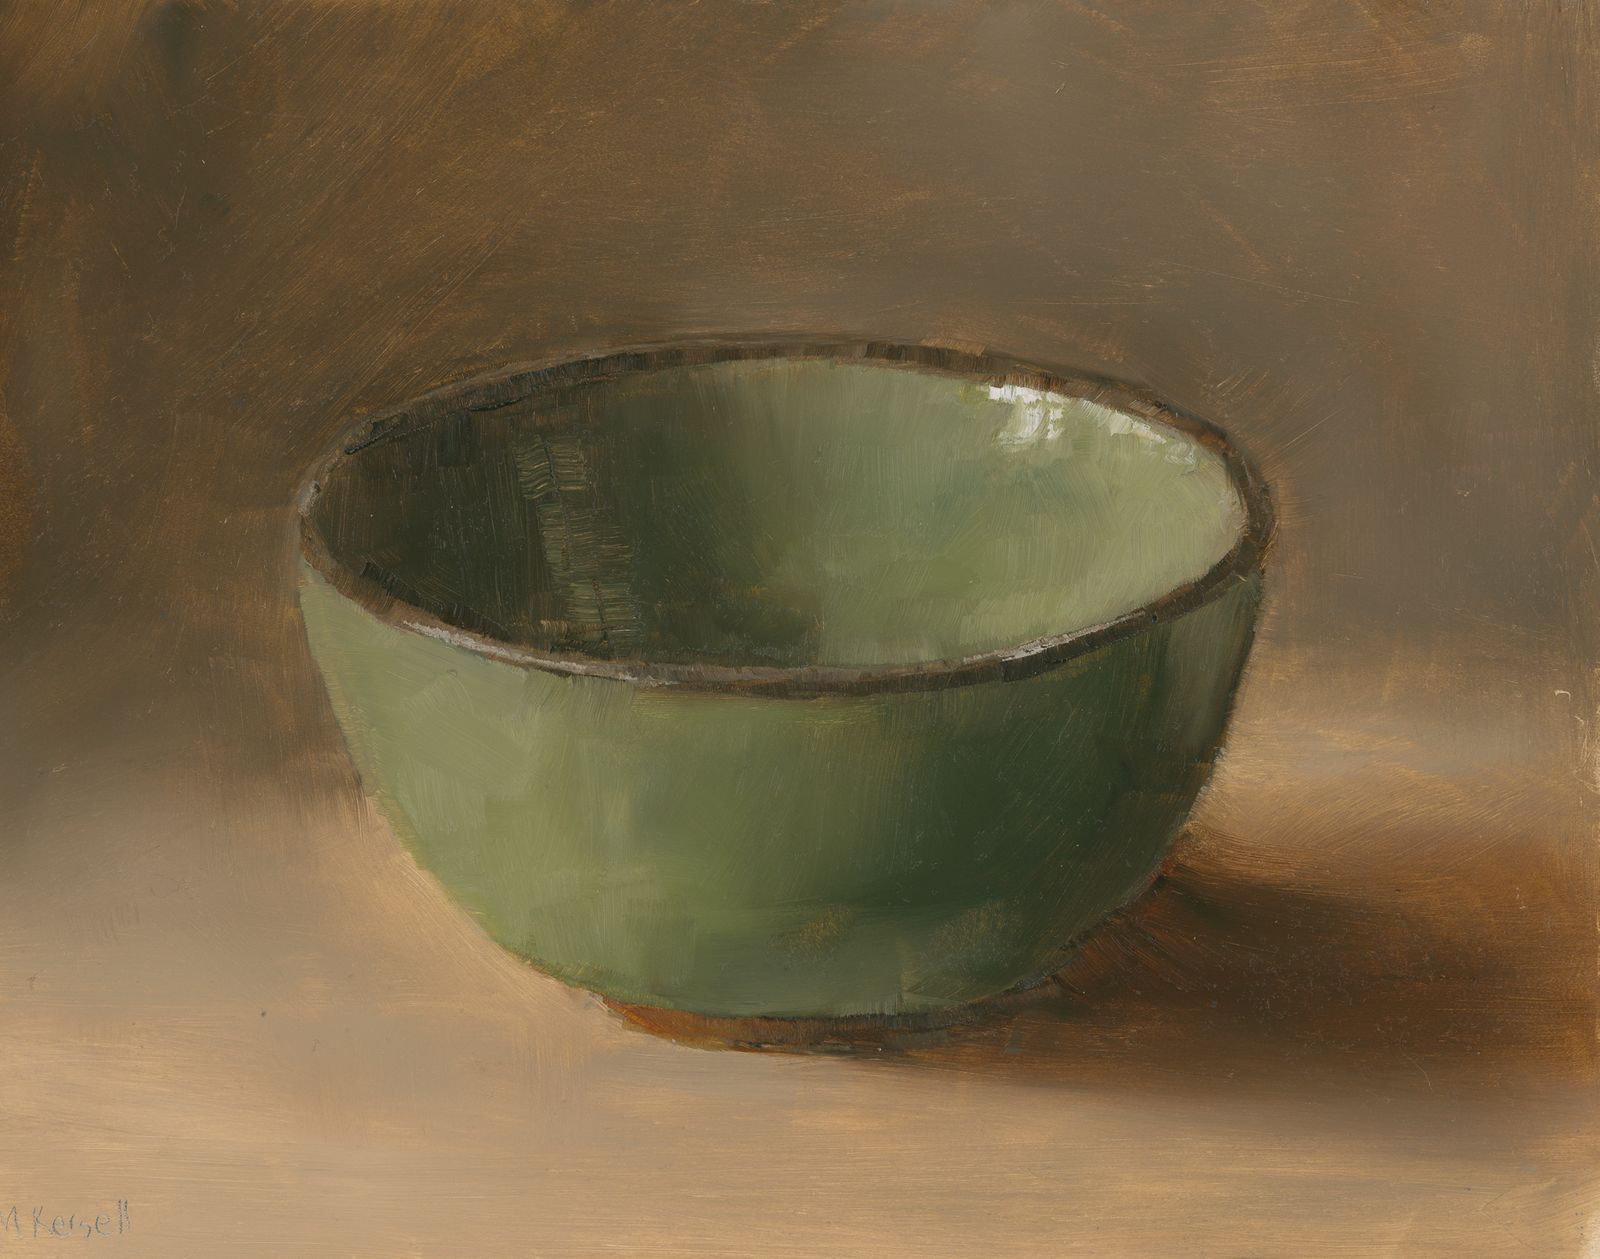 An oil painting on panel of a small shiny green ceramic bowl.